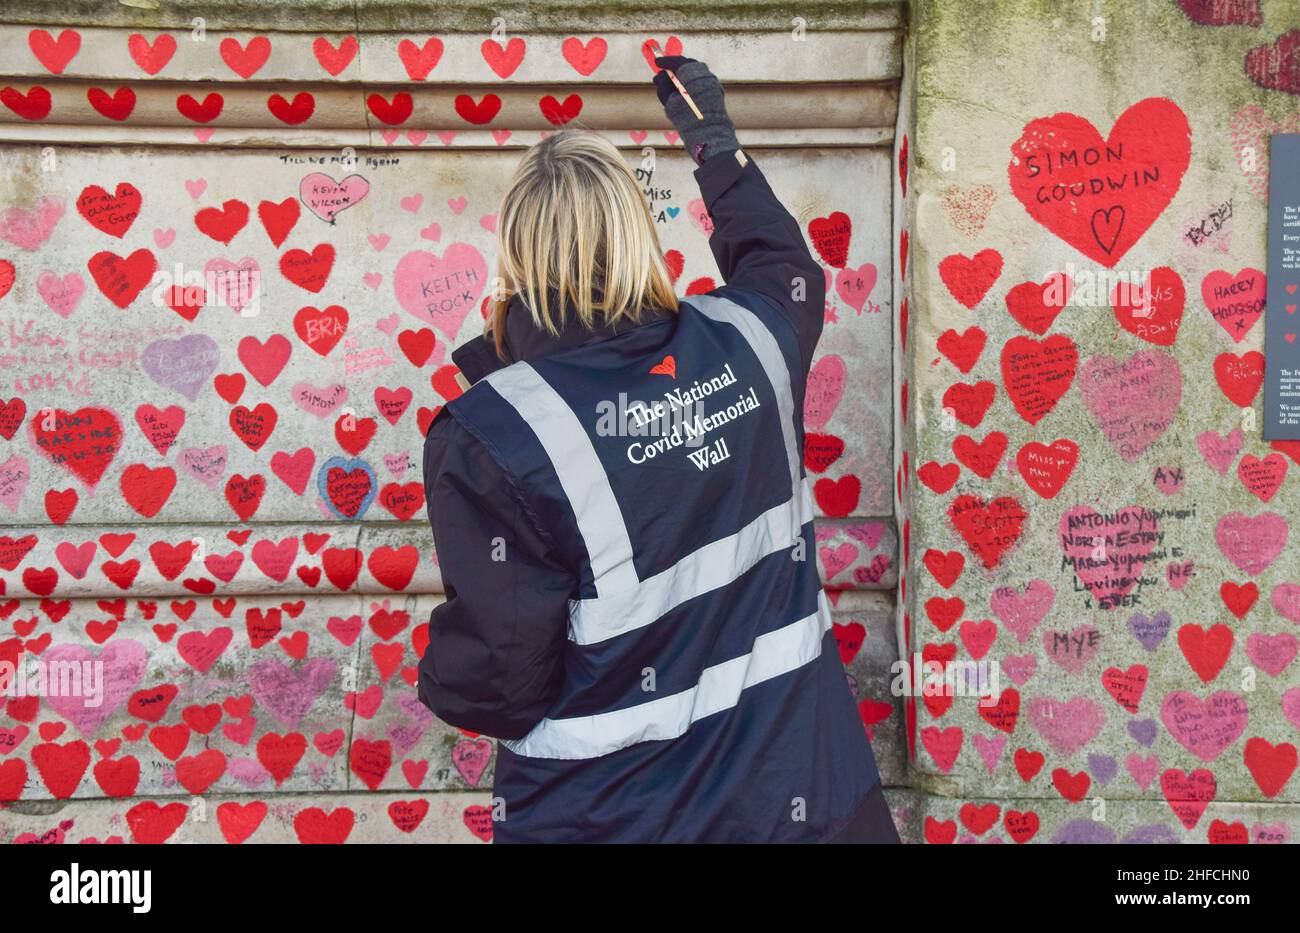 A volunteer paints red hearts on the National Covid Memorial Wall. Over 150,000 hearts have been painted to date on the wall outside St Thomas' Hospital opposite the Houses of Parliament, one for each life lost to COVID-19. (Photo by Vuk Valcic / SOPA Images/Sipa USA) Stock Photo